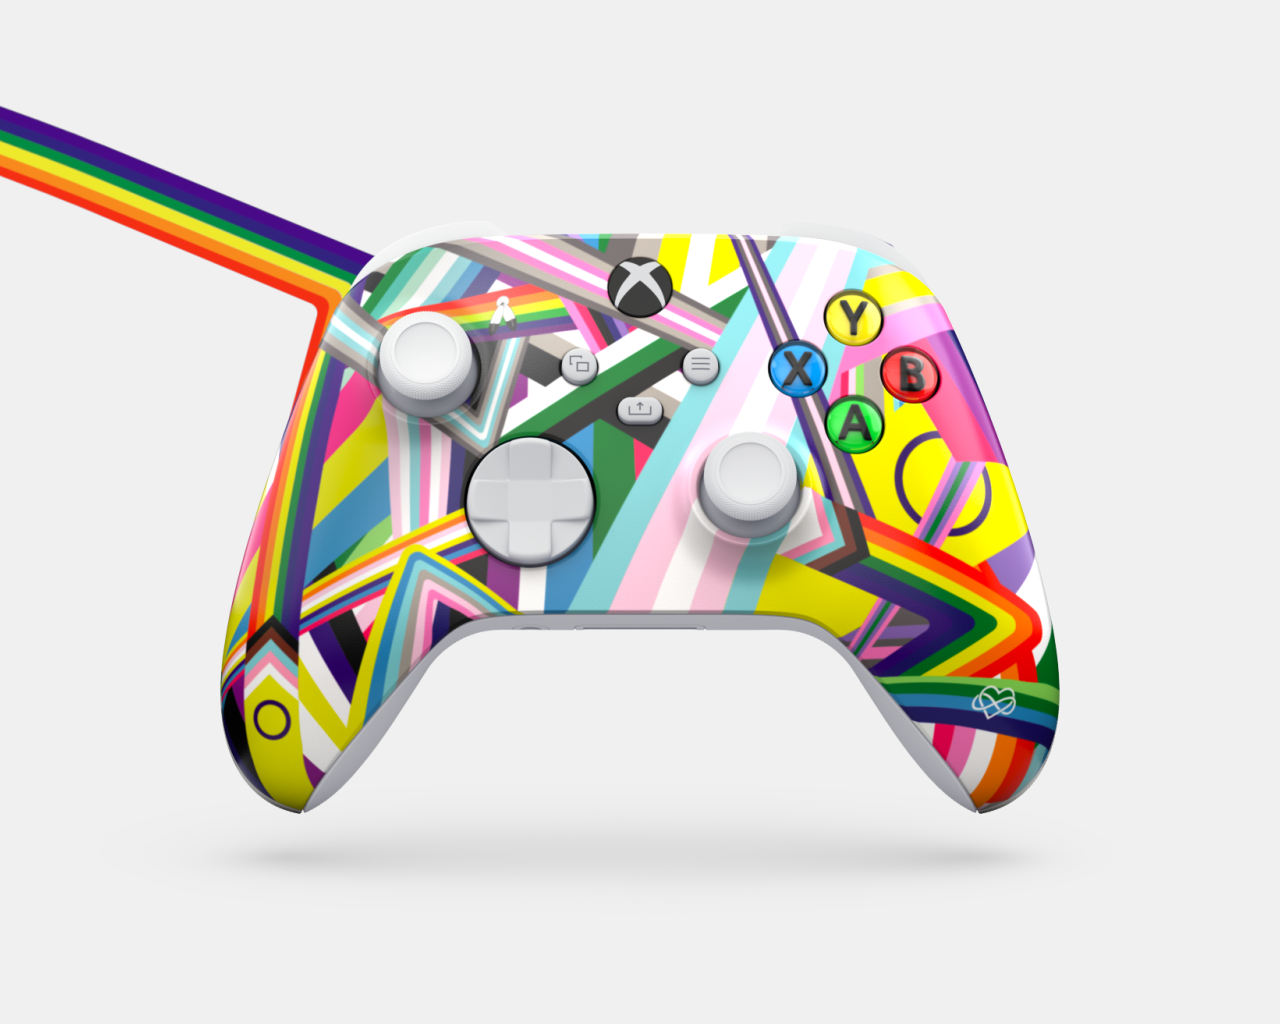 Pride Xbox controller with rainbow flag appearing to side